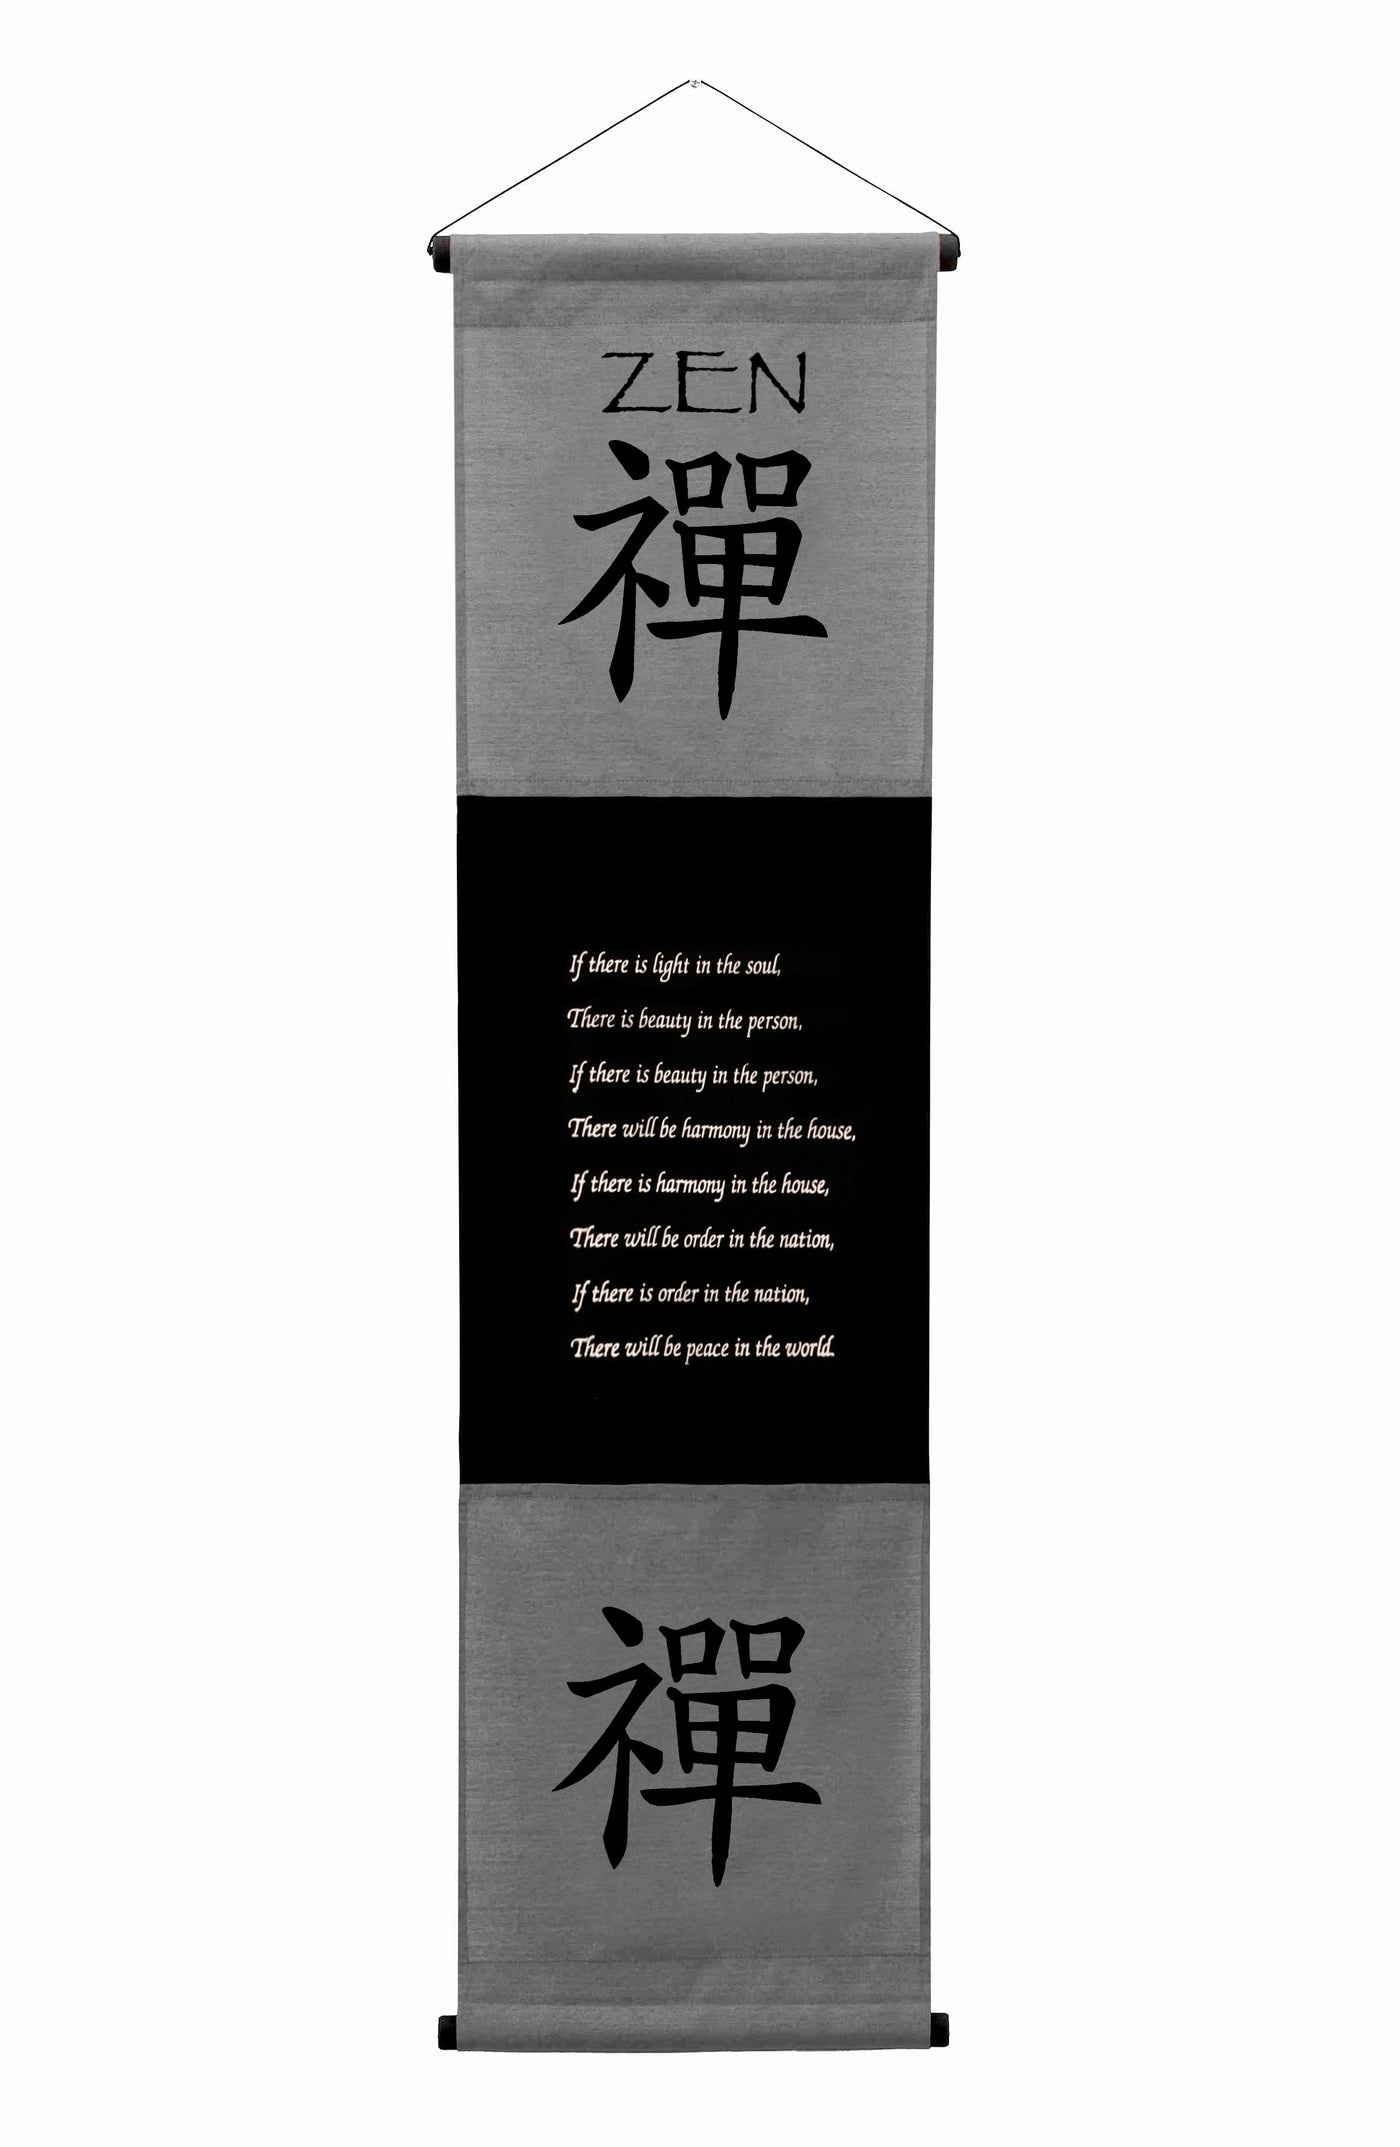 Inspirational Wall Decor "Zen" Banner Large, Inspiring Quote Hanging Scroll, Affirmation Motivational Uplifting Message Art, Thought Saying Tapestry